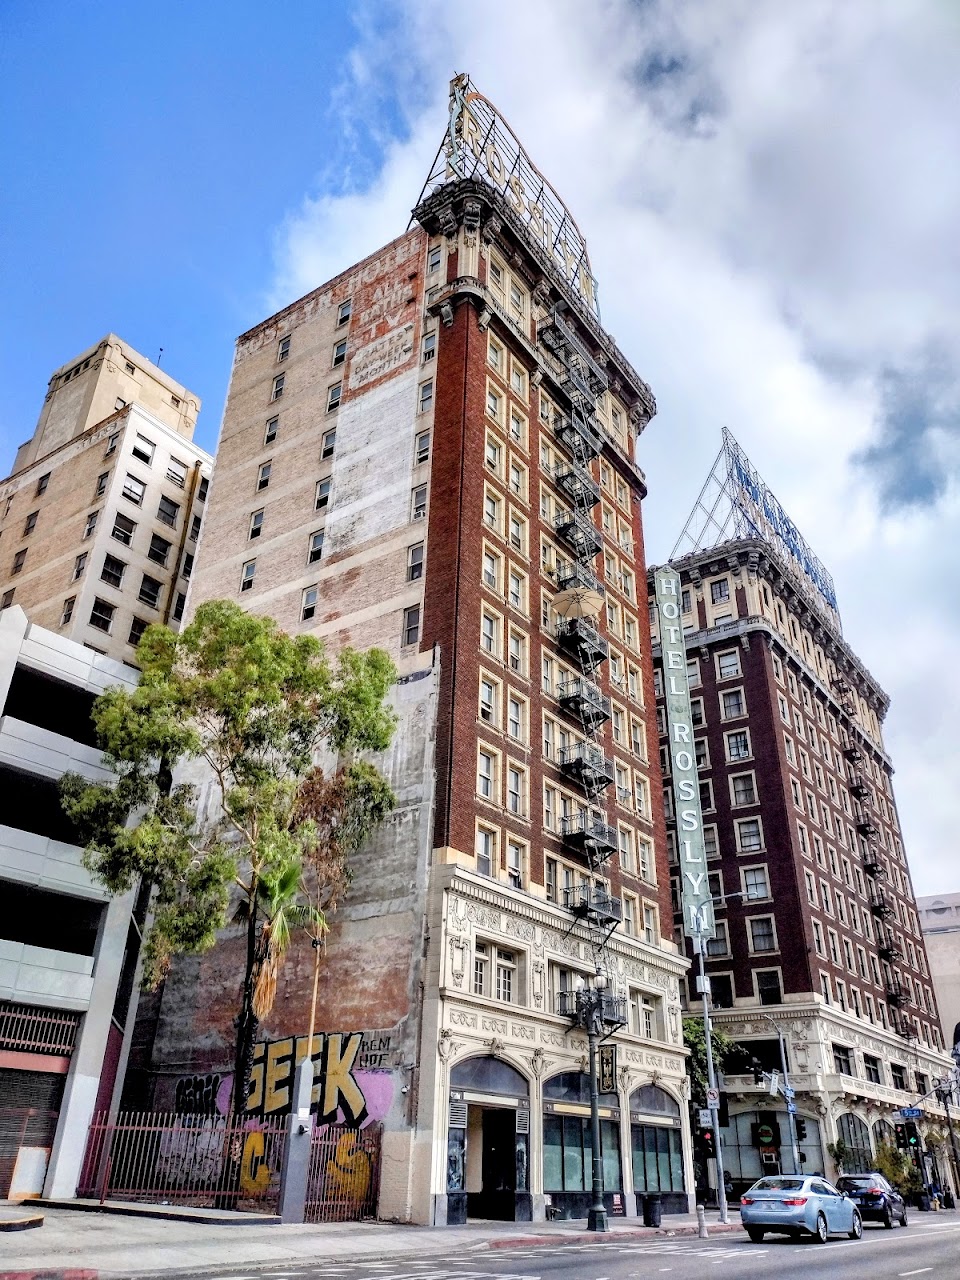 Photo of ROSSLYN HOTEL APARTMENTS. Affordable housing located at 112 W 5TH STREET LOS ANGELES, CA 90013